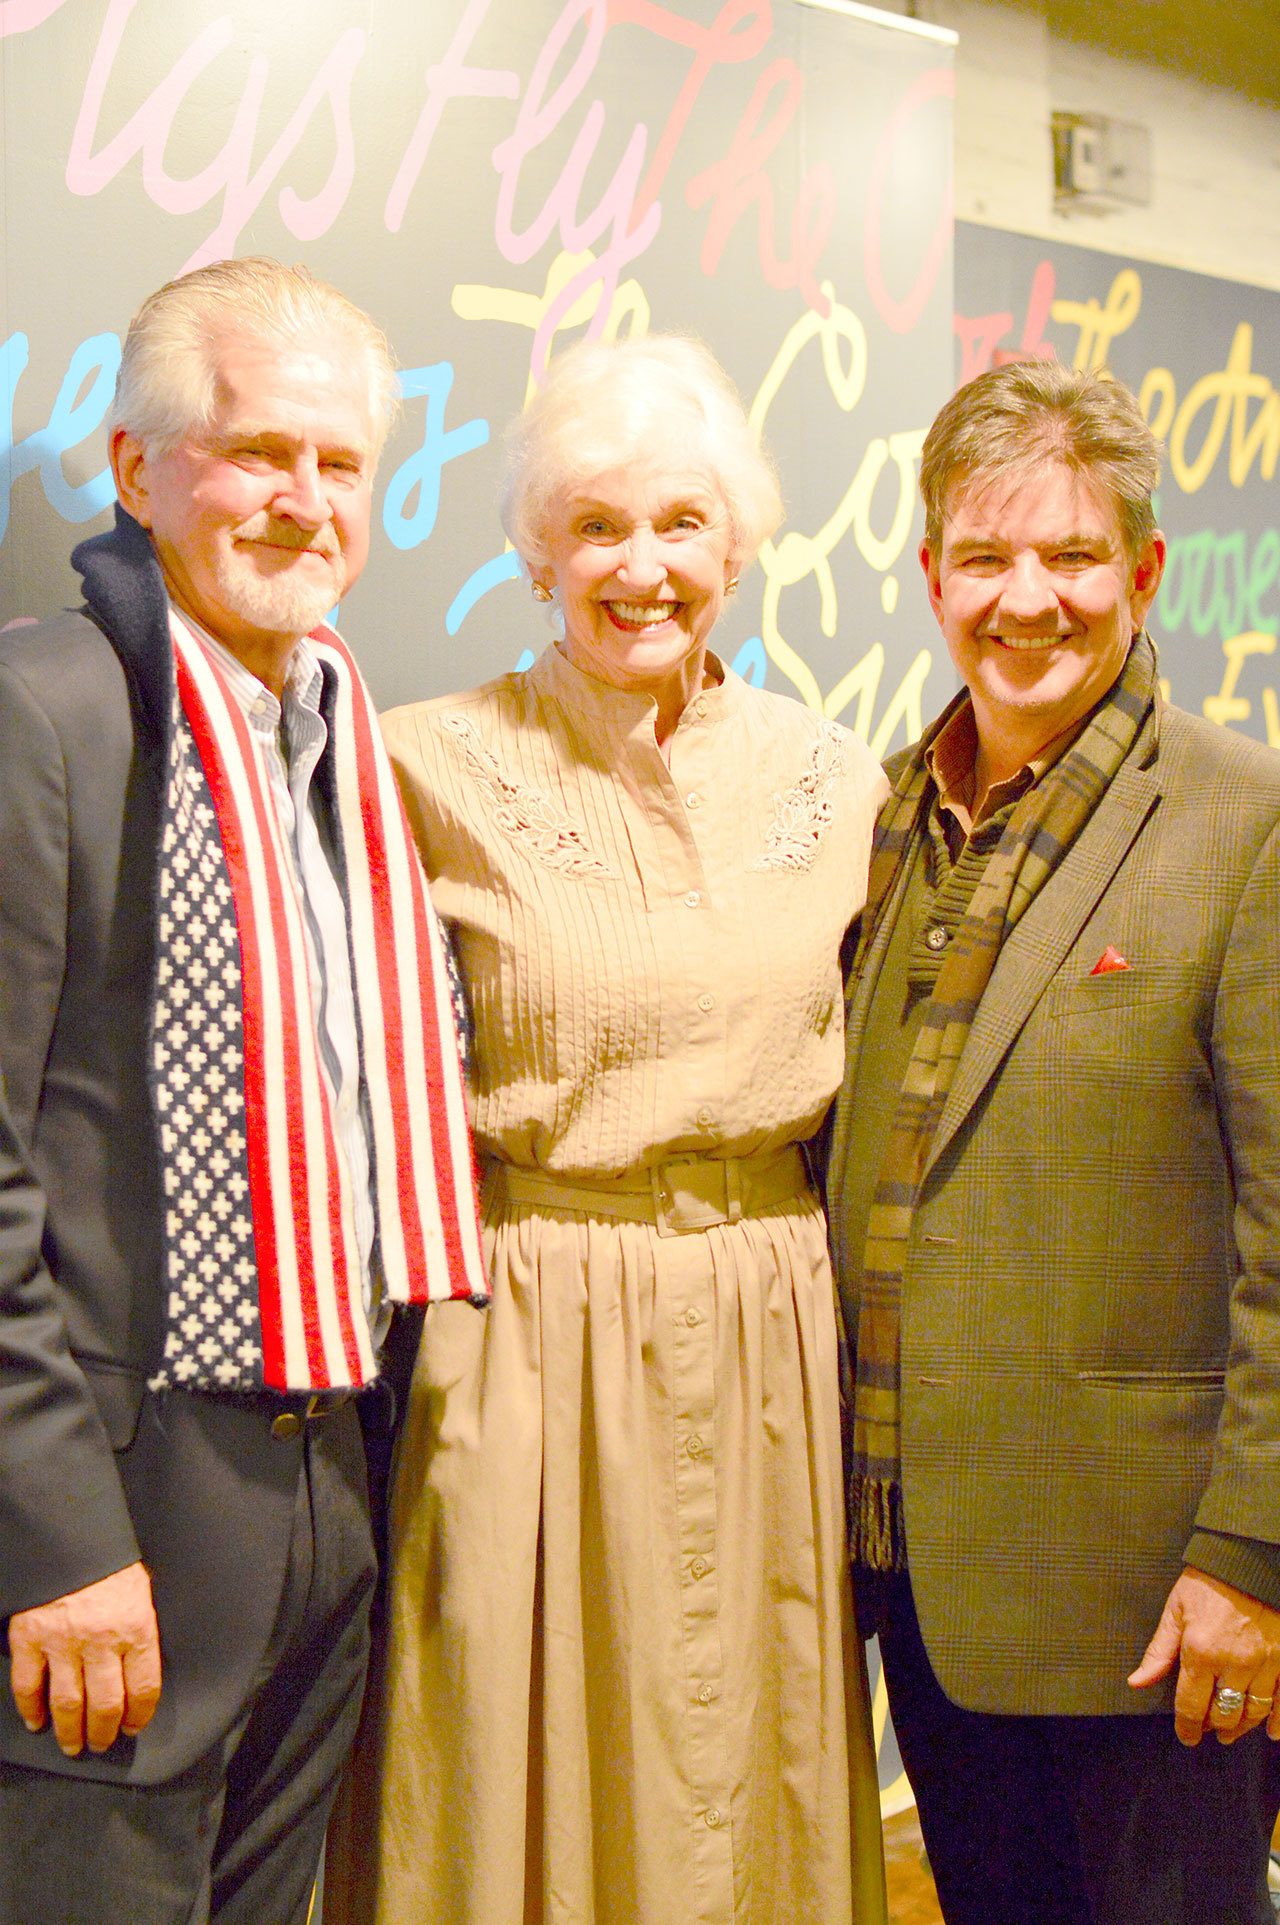 Jim Dries of Sequim, left, with actress Carol Swarbrick Dries and stage manager Mark Hamilton, presented their play “Lillian Carter: More than a President’s Mother” at Theatre Row in New York City last Saturday night. (Diane Urbani de la Paz/for Peninsula Daily News)